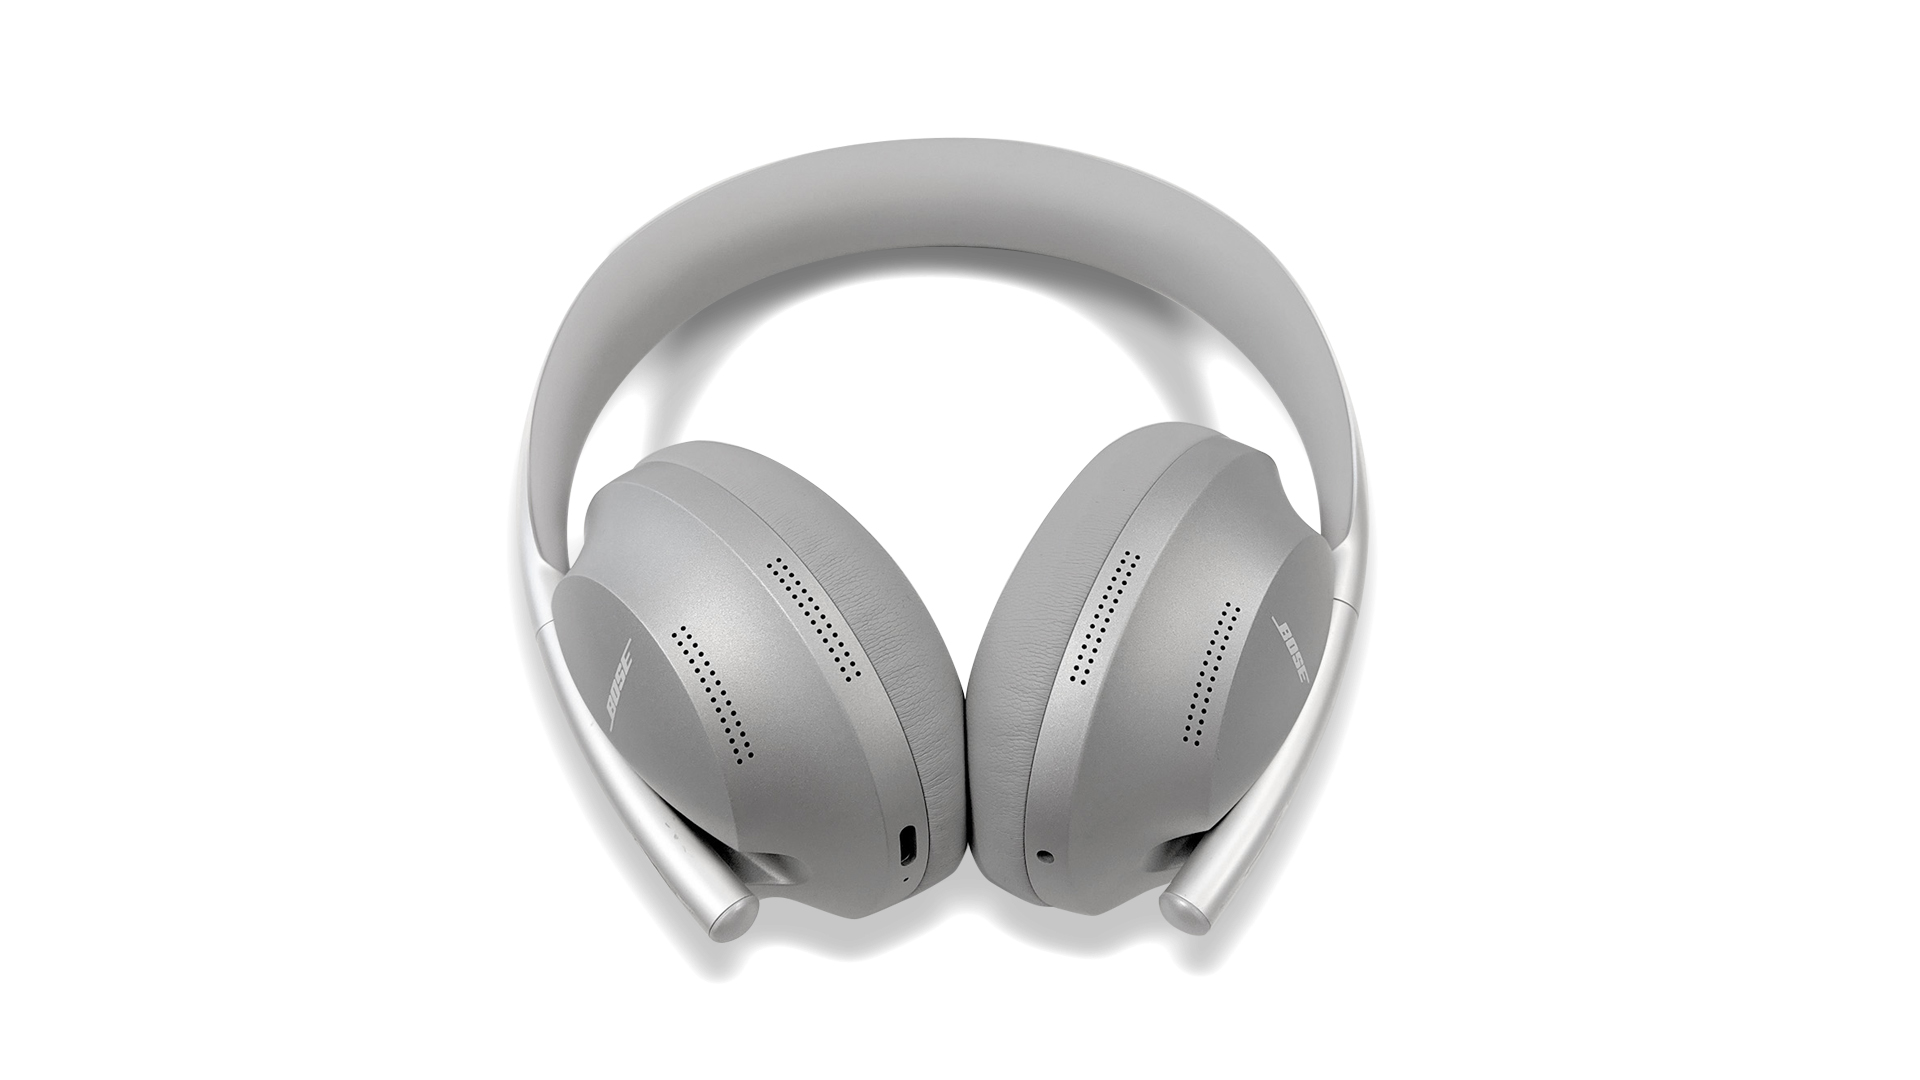 The Bose Noise Cancelling Headphones 700 in silver on a white background.